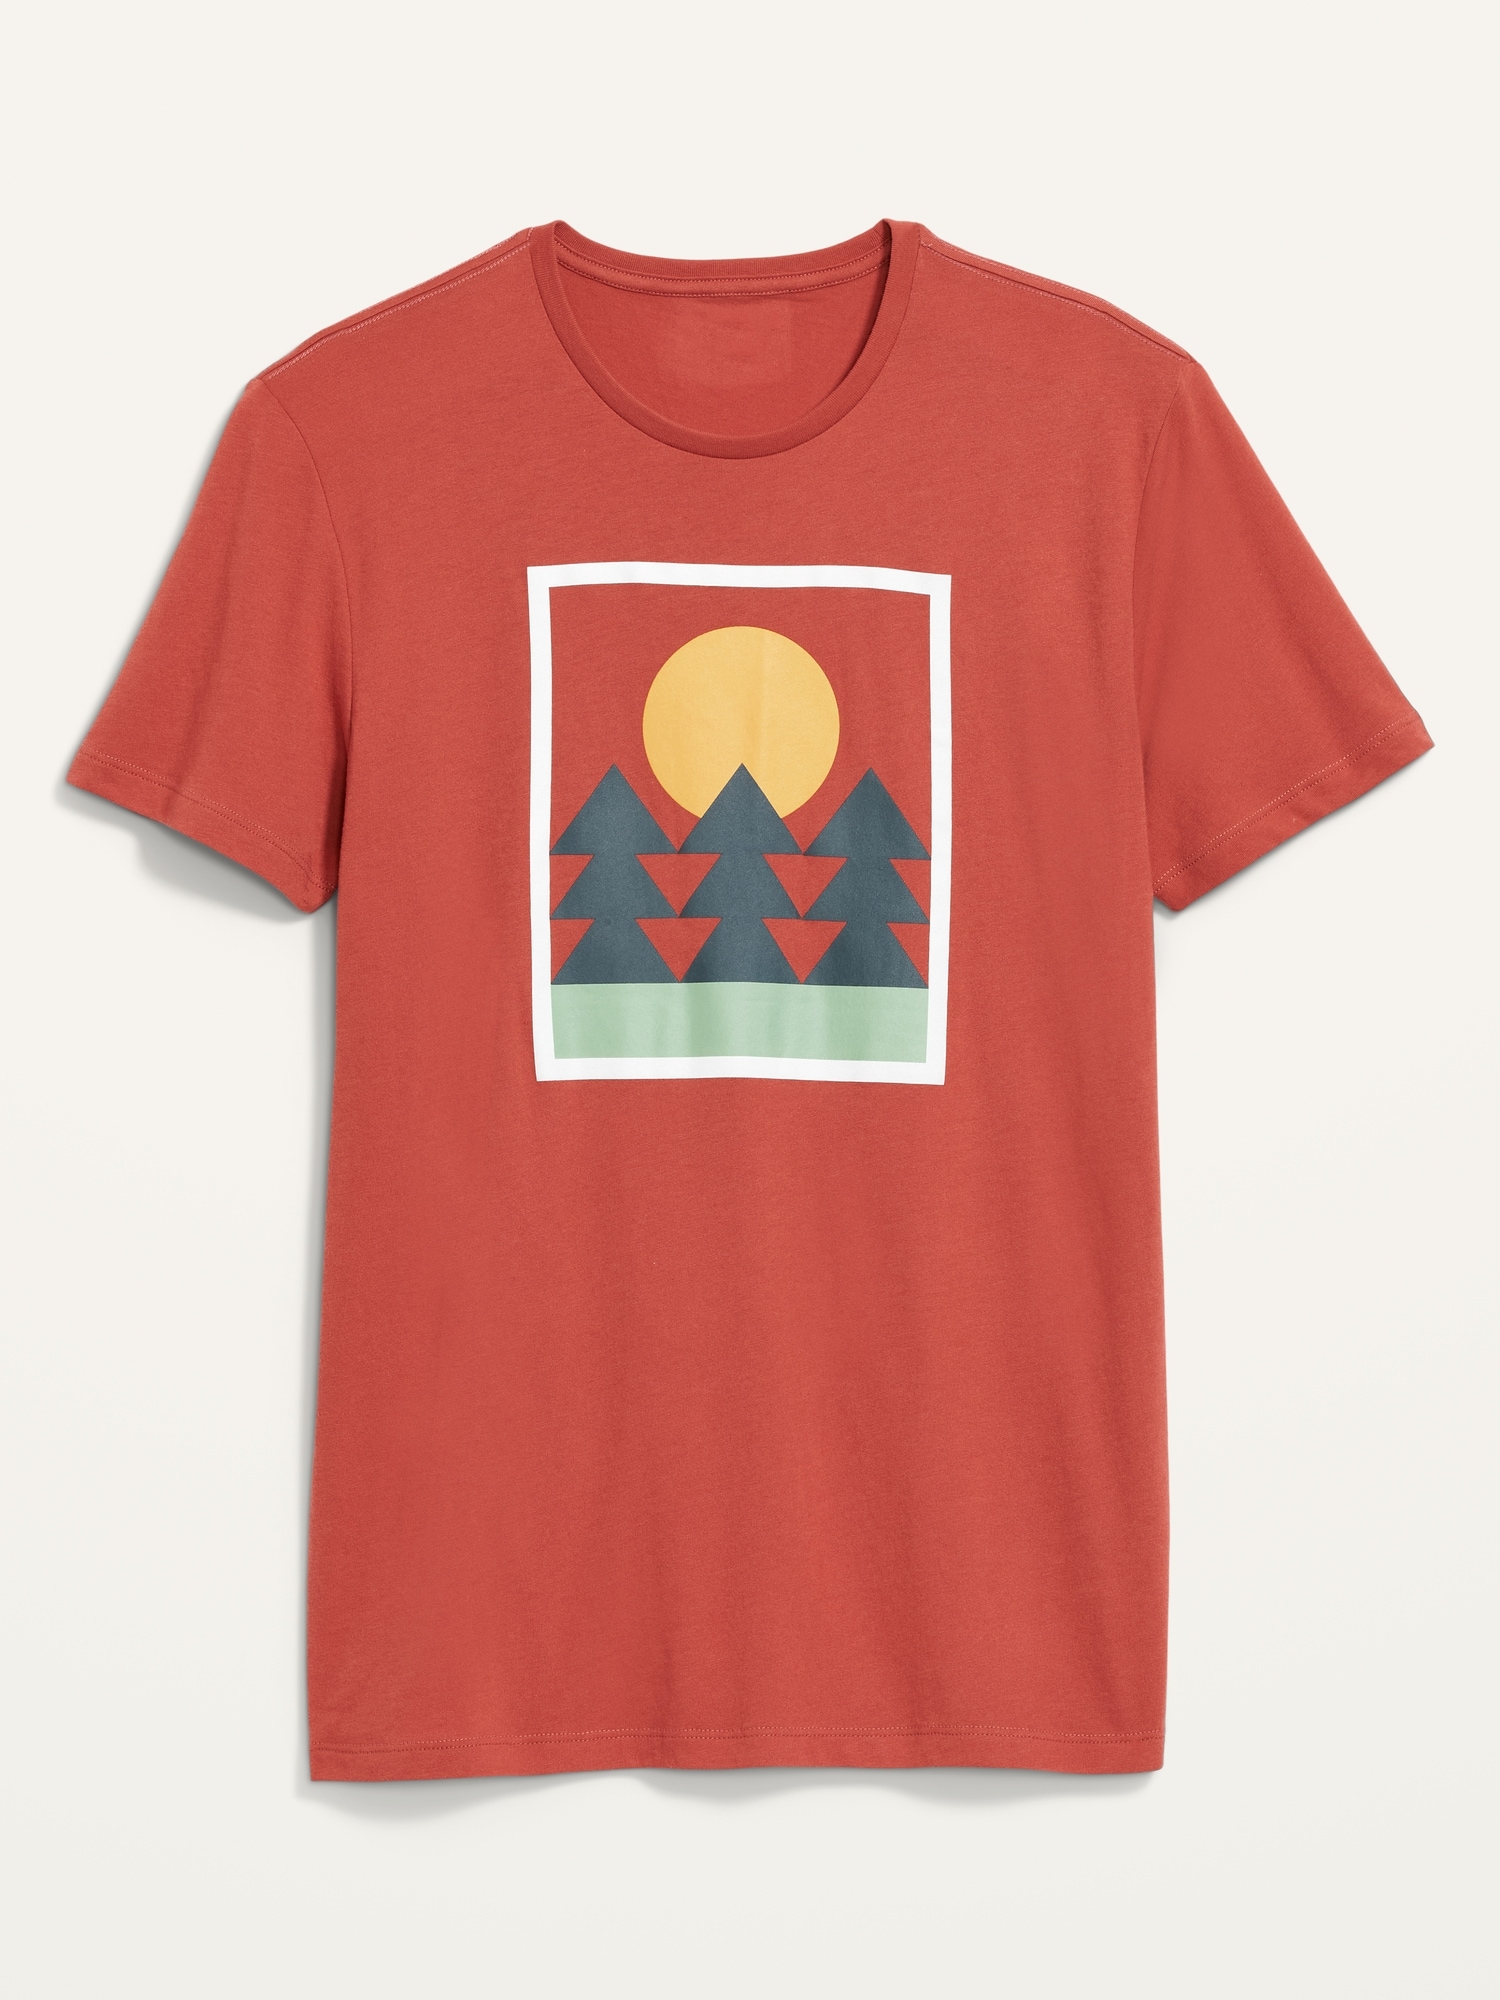 Soft-Washed Graphic T-Shirt for Men | Old Navy